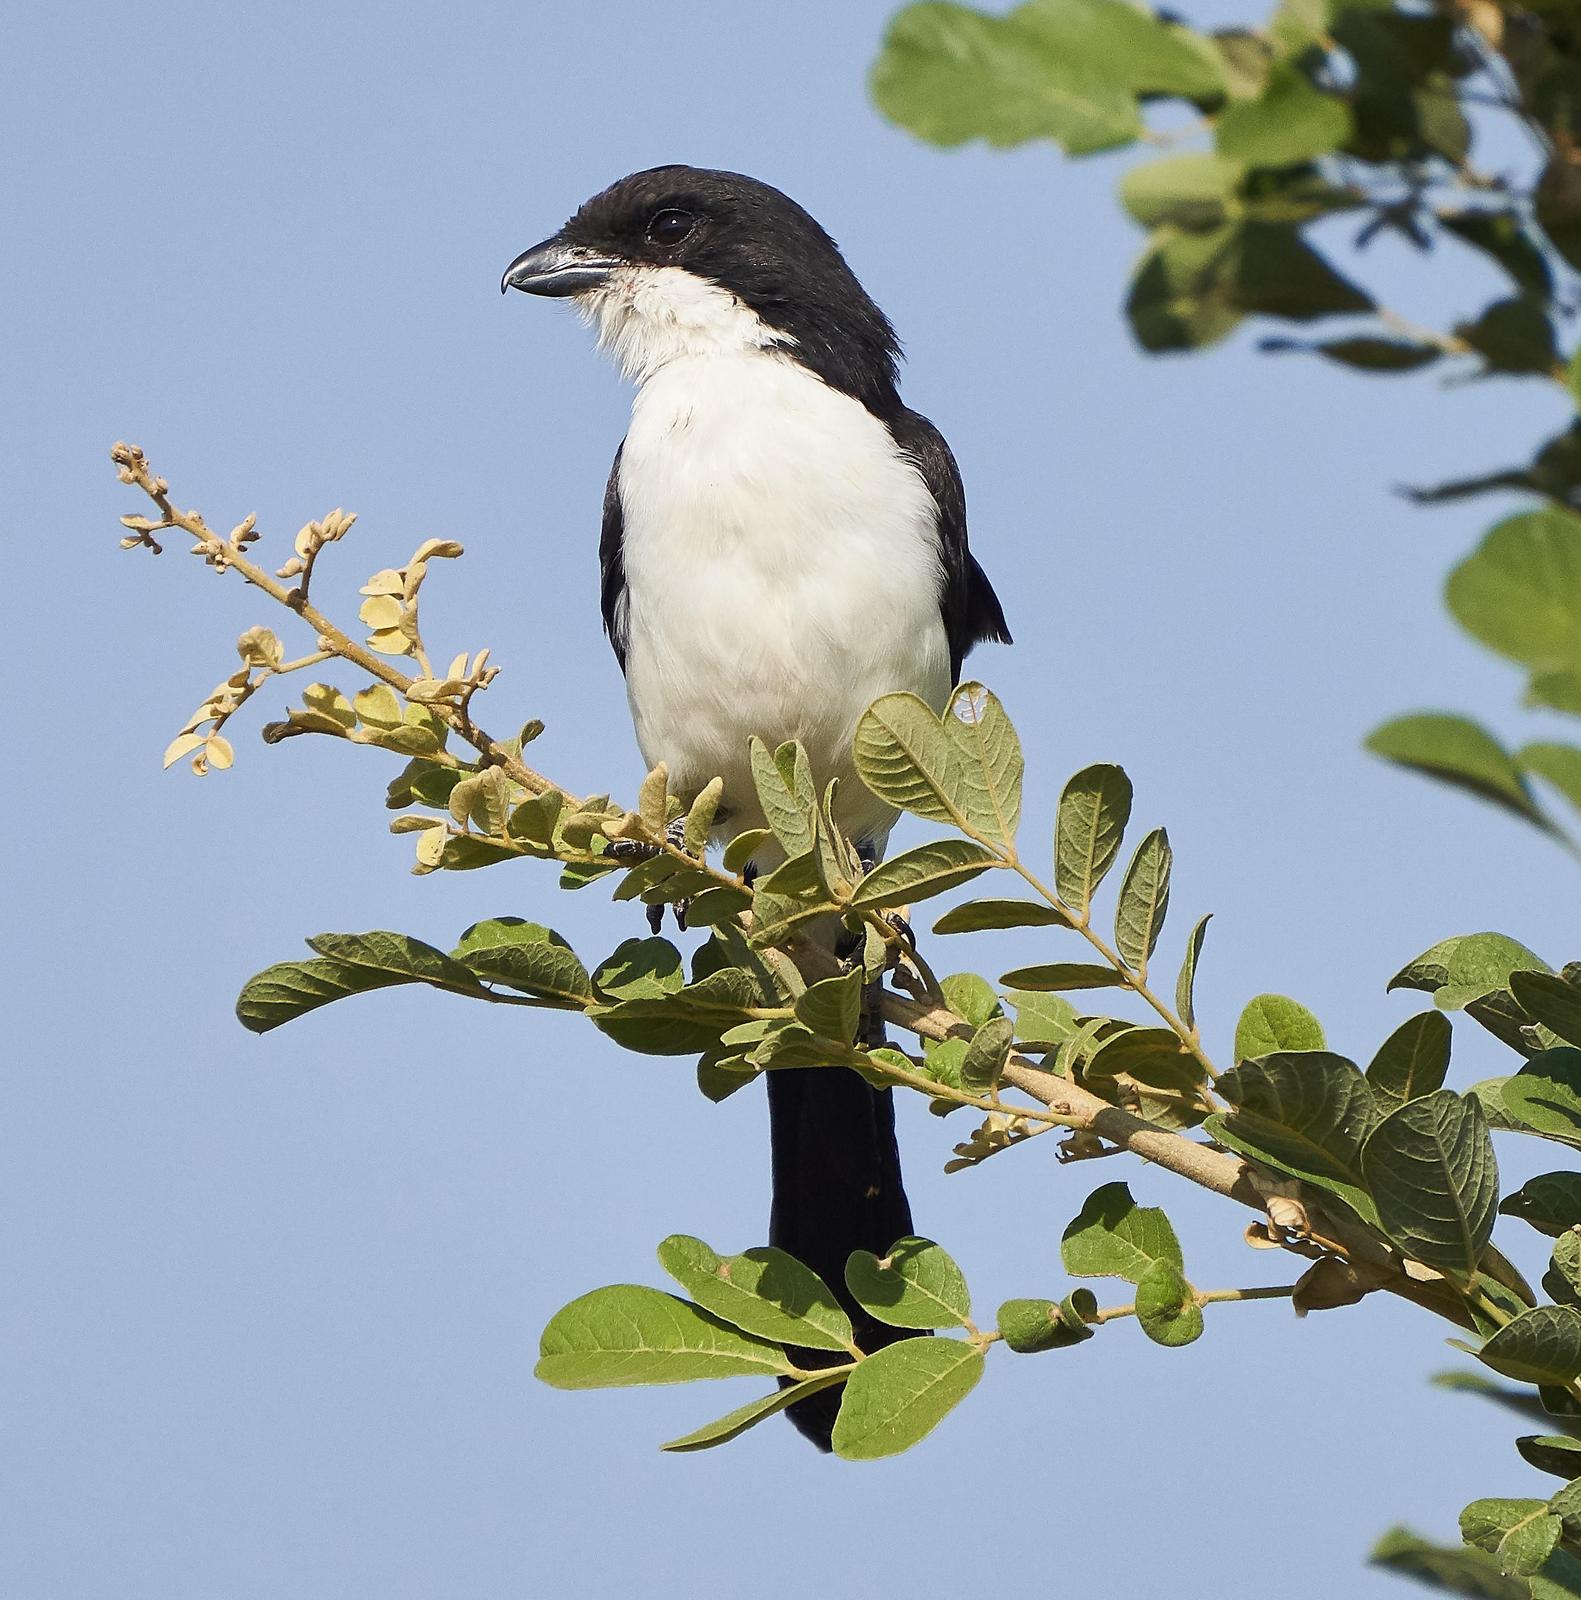 Long-tailed Fiscal Photo by Steven Cheong